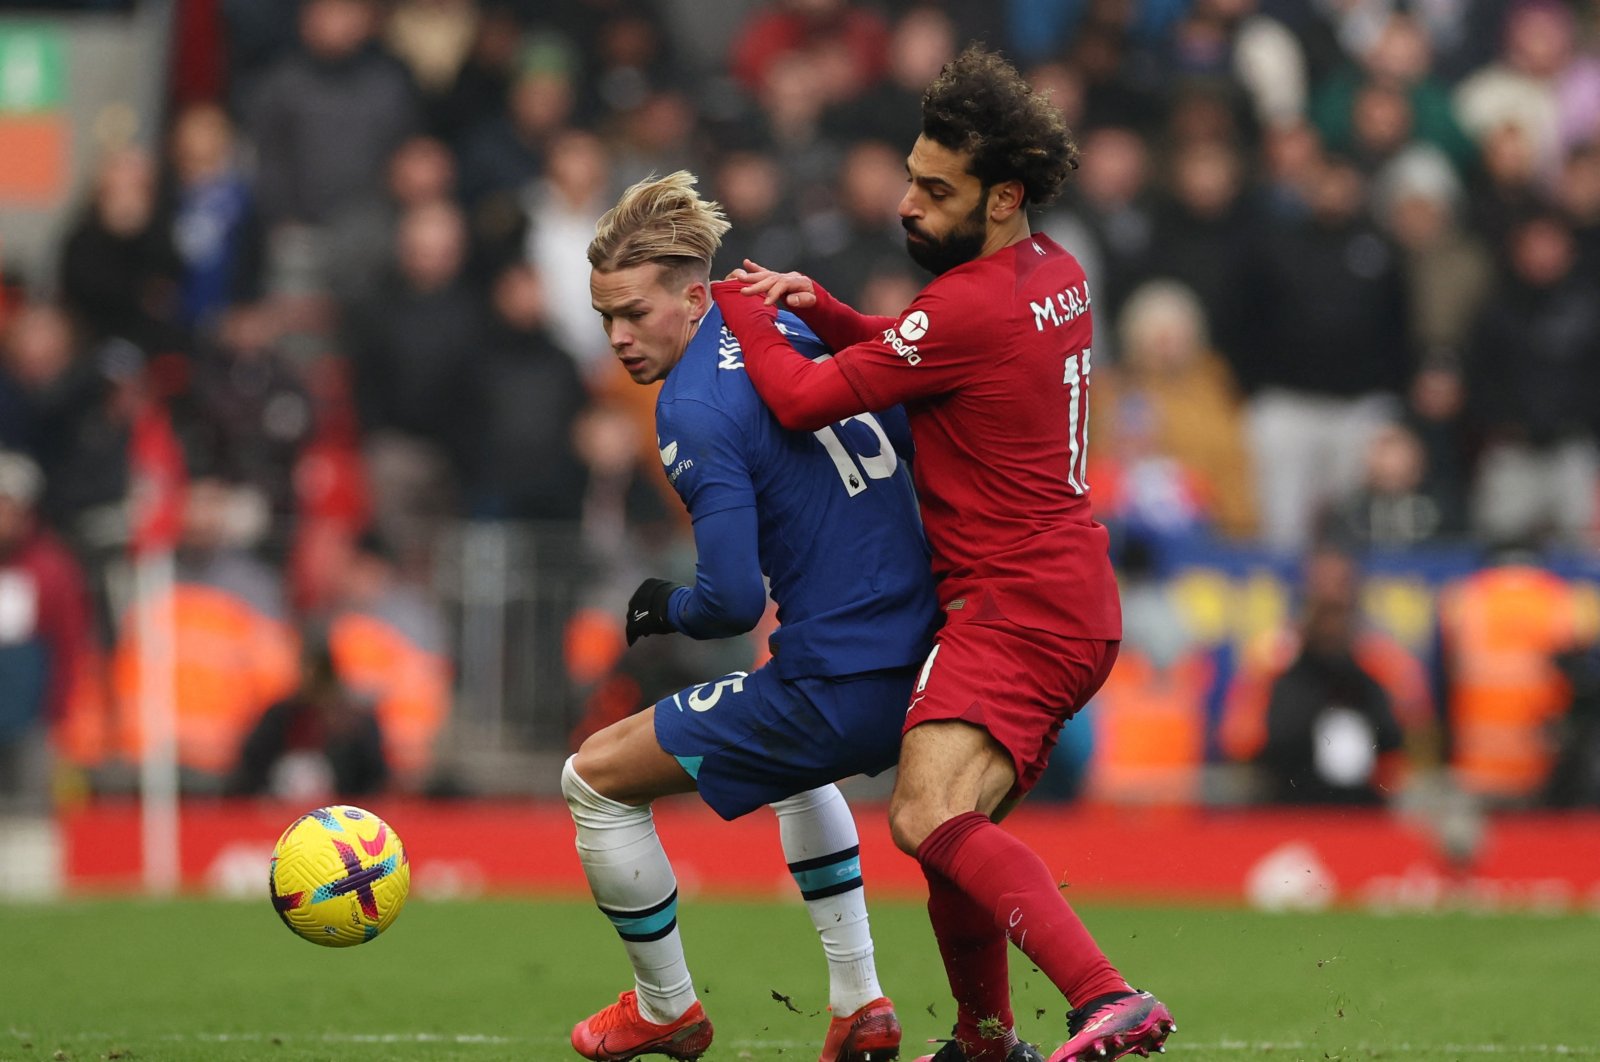 Chelsea&#039;s Mykhailo Mudryk in action with Liverpool&#039;s Mohamed Salah at Anfield, Liverpool, UK., Jan. 21, 2023. (Reuters Photo)